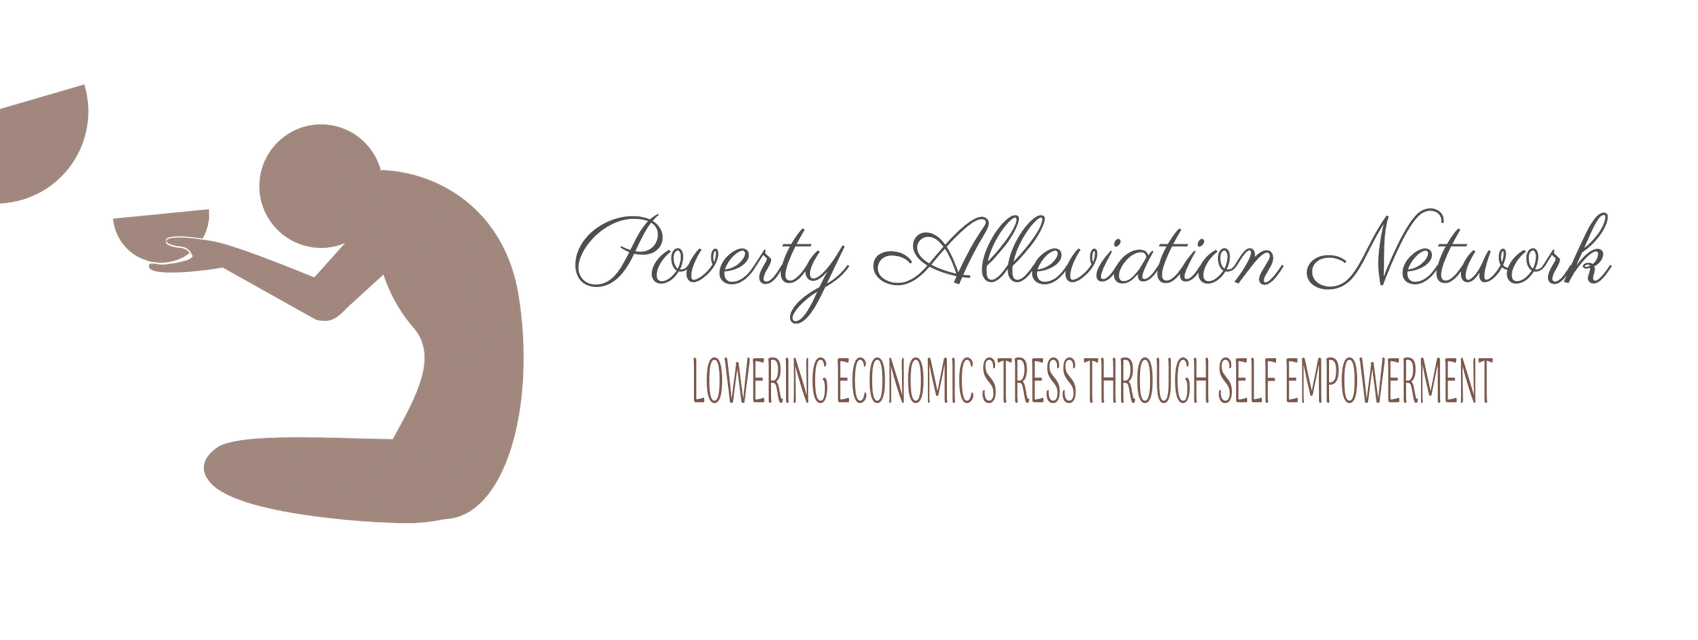 Poverty Alleviation Network